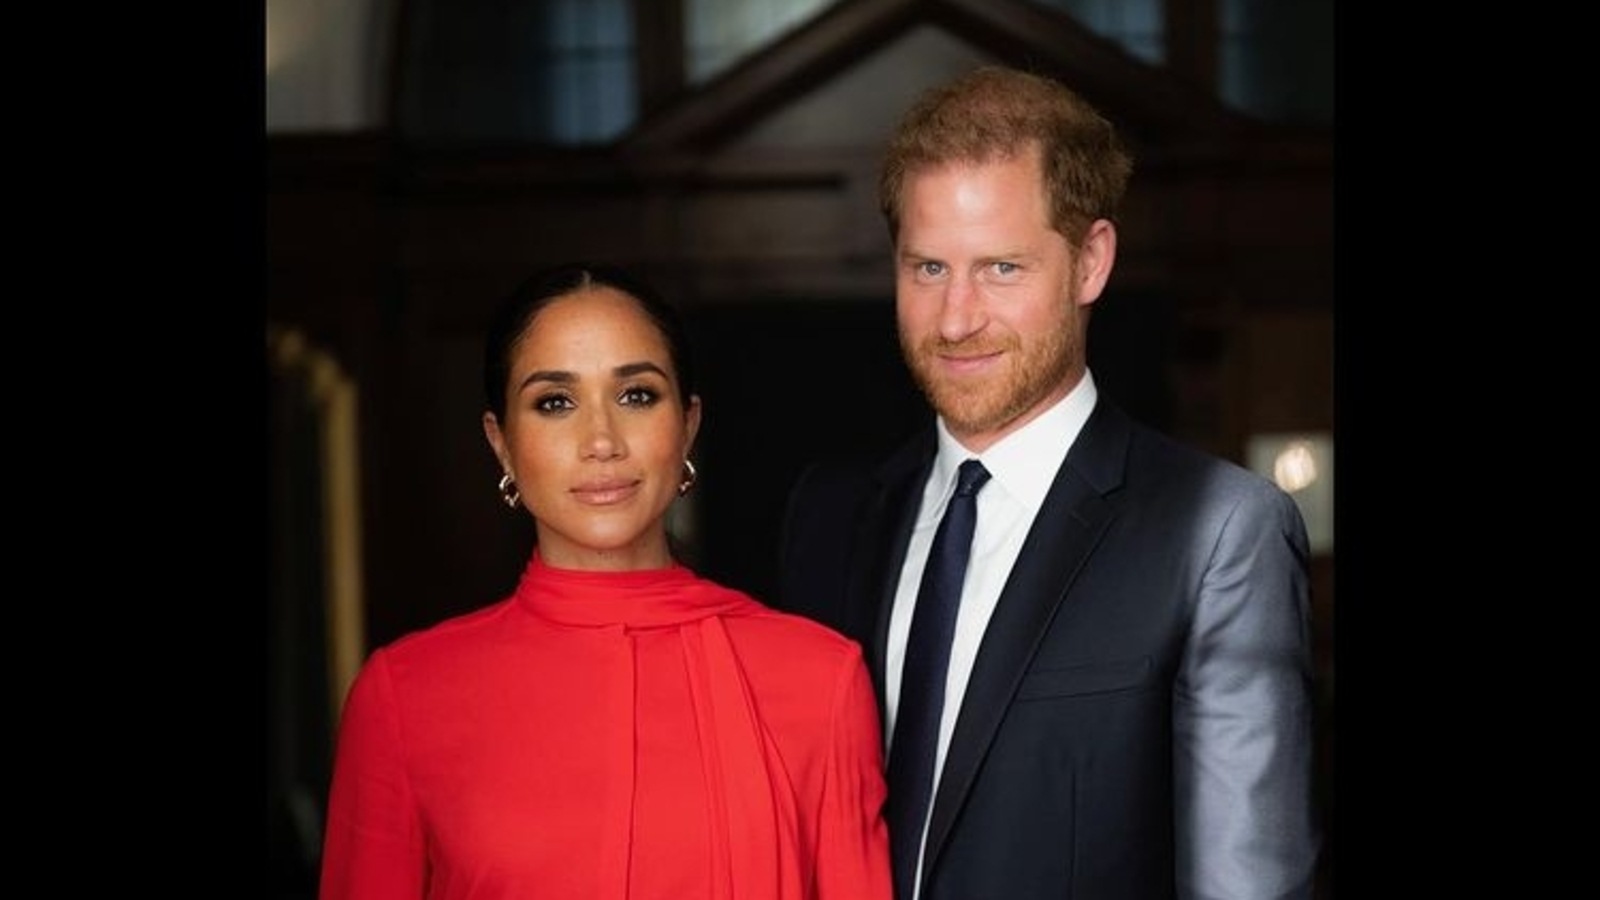 prince-harry-and-meghan-markle-may-not-join-royal-family-for-christmas-report